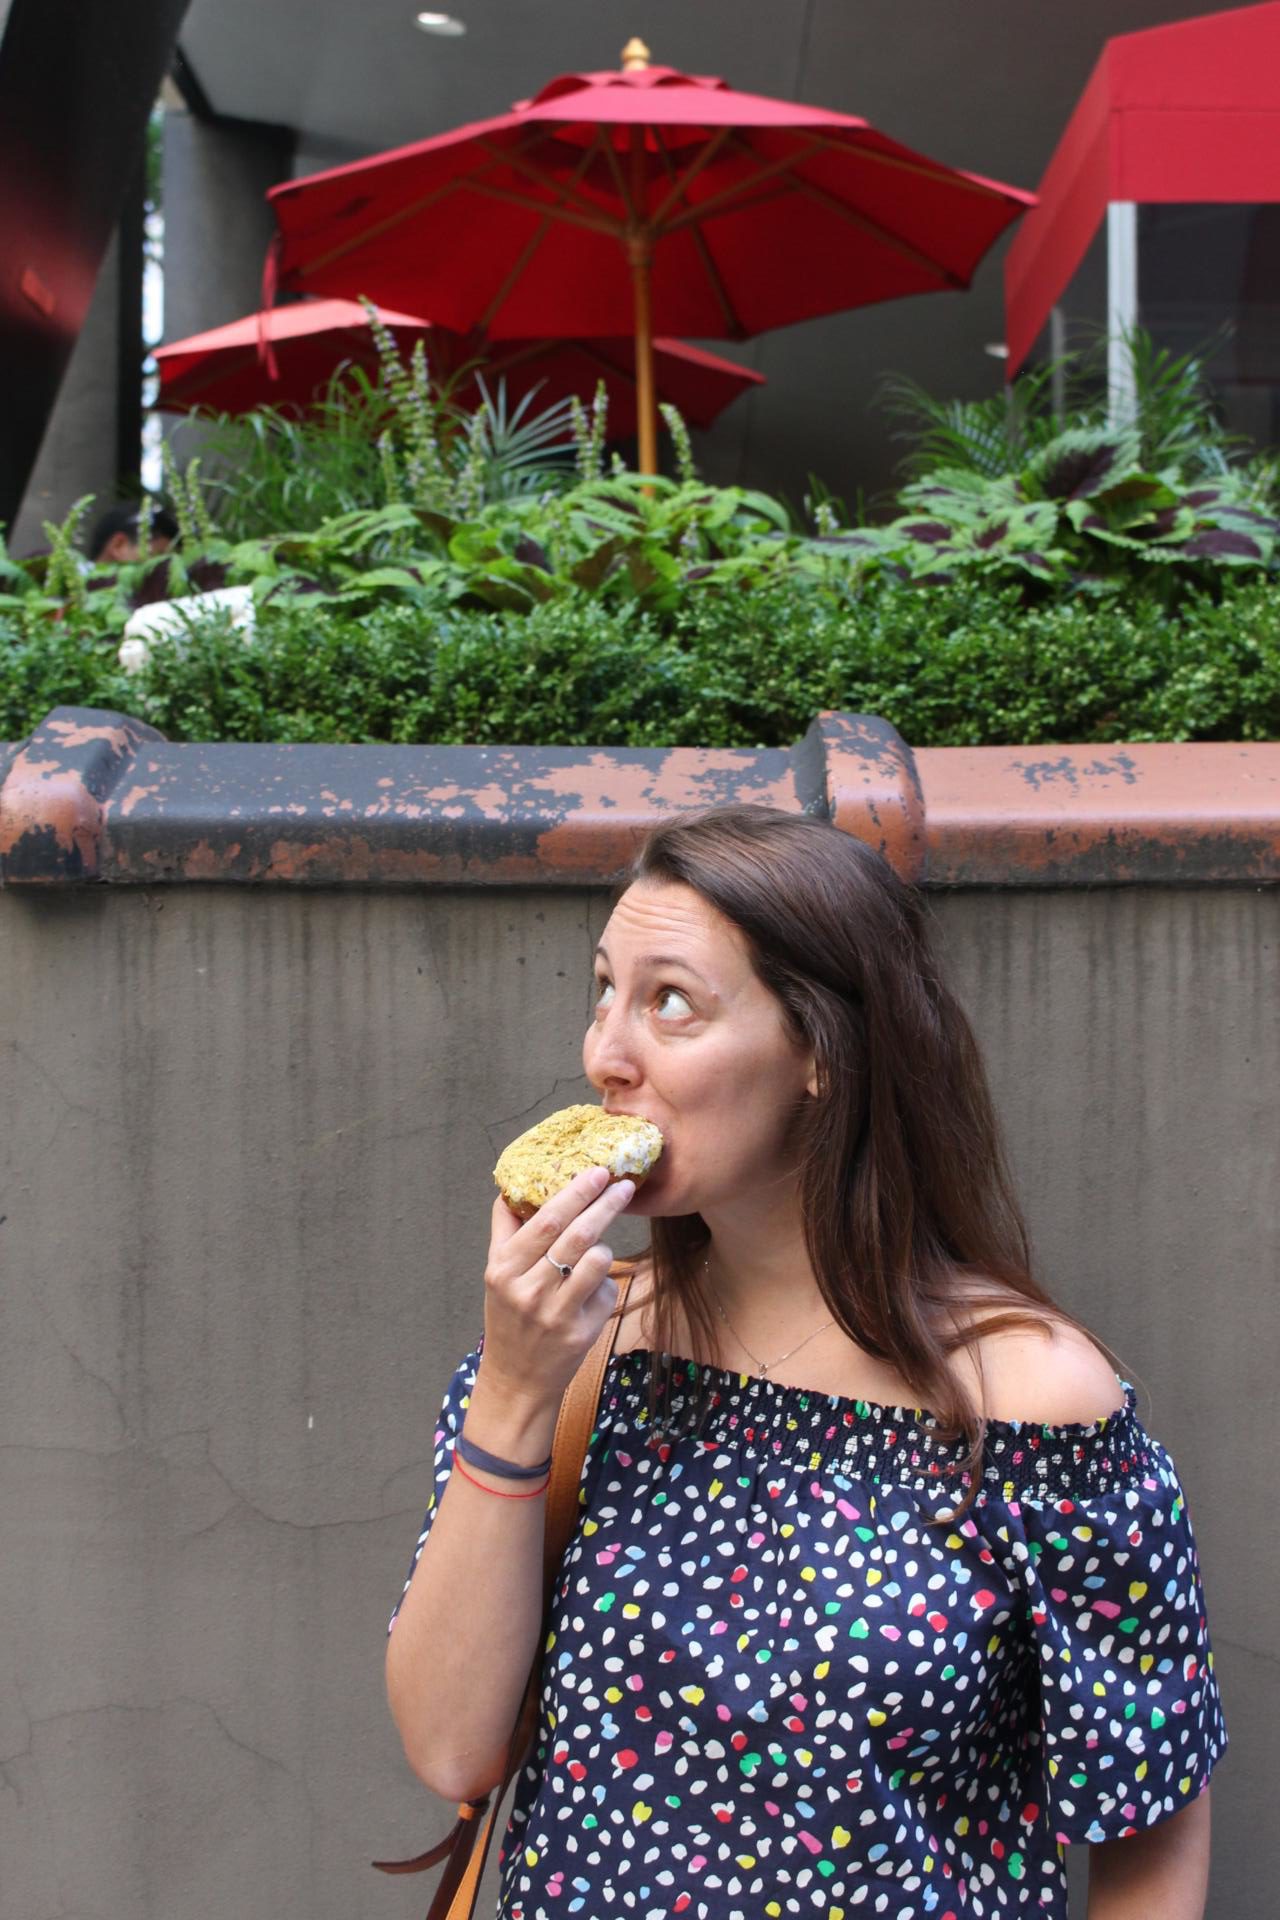 TRAVEL: A Girl and Her Windy City Donut(s) - A Girl and the Best Donuts in Chicago by popular New Jersey foodie blogger What's For Dinner Esq.